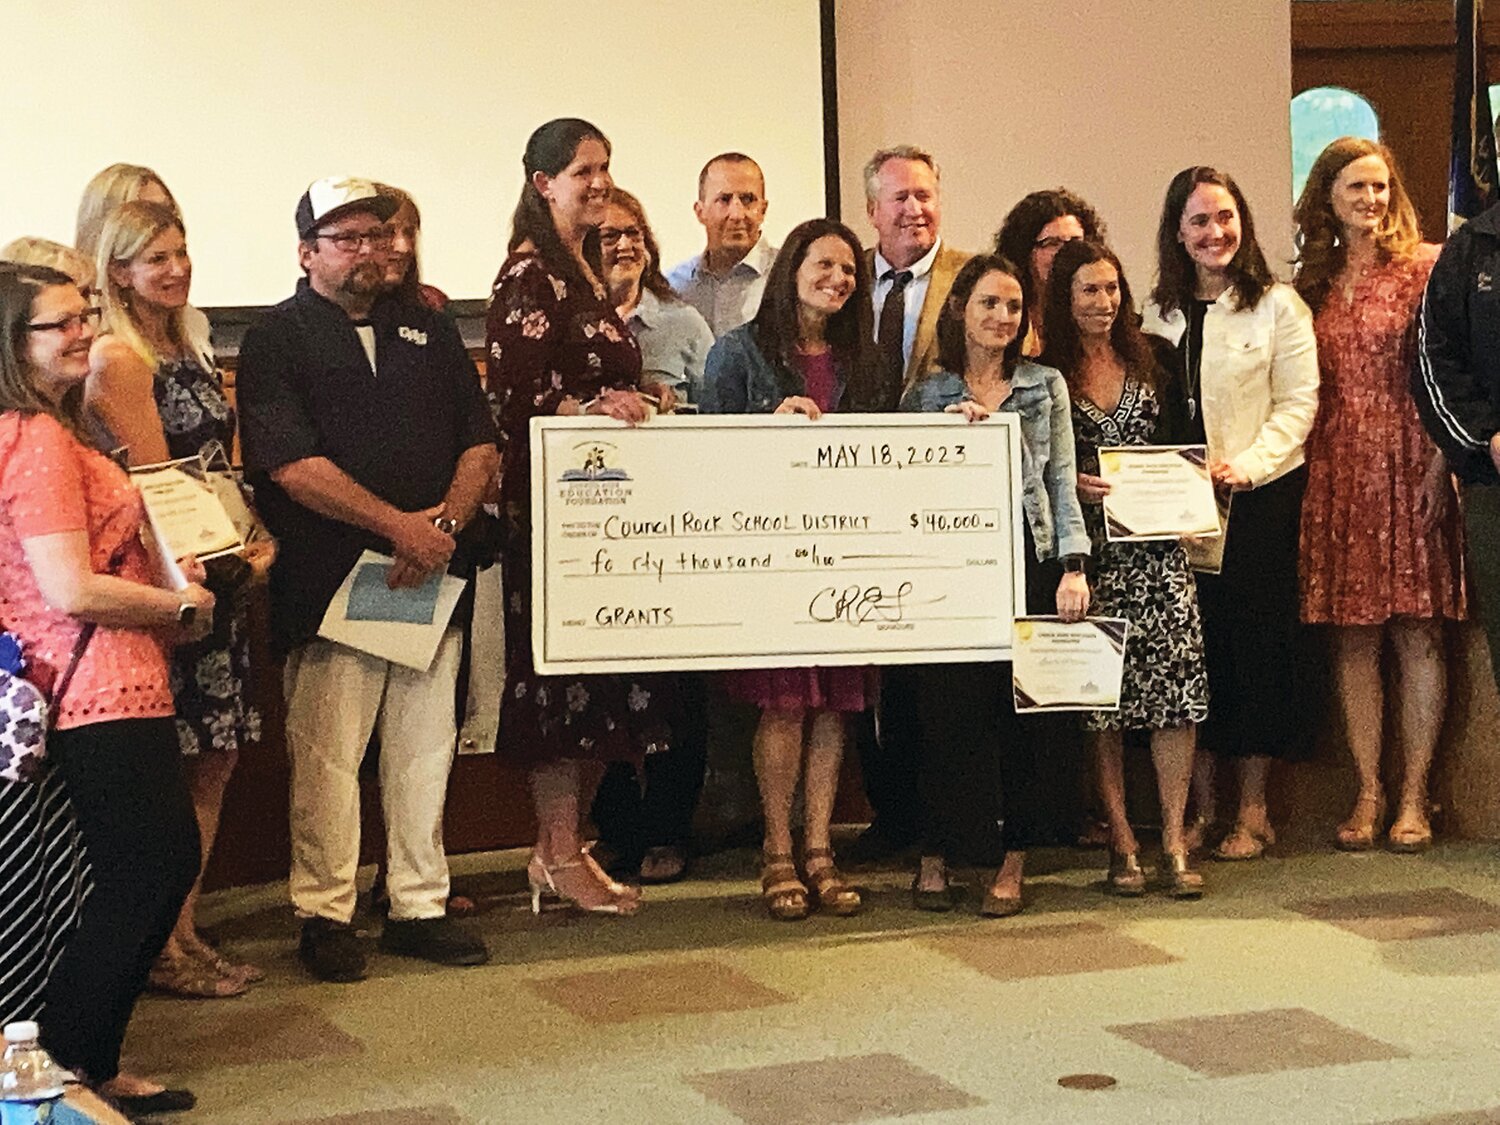 The Council Rock Education Foundation awarded a total of $40,000 in grants for nine innovative programs at a recent school board meeting.